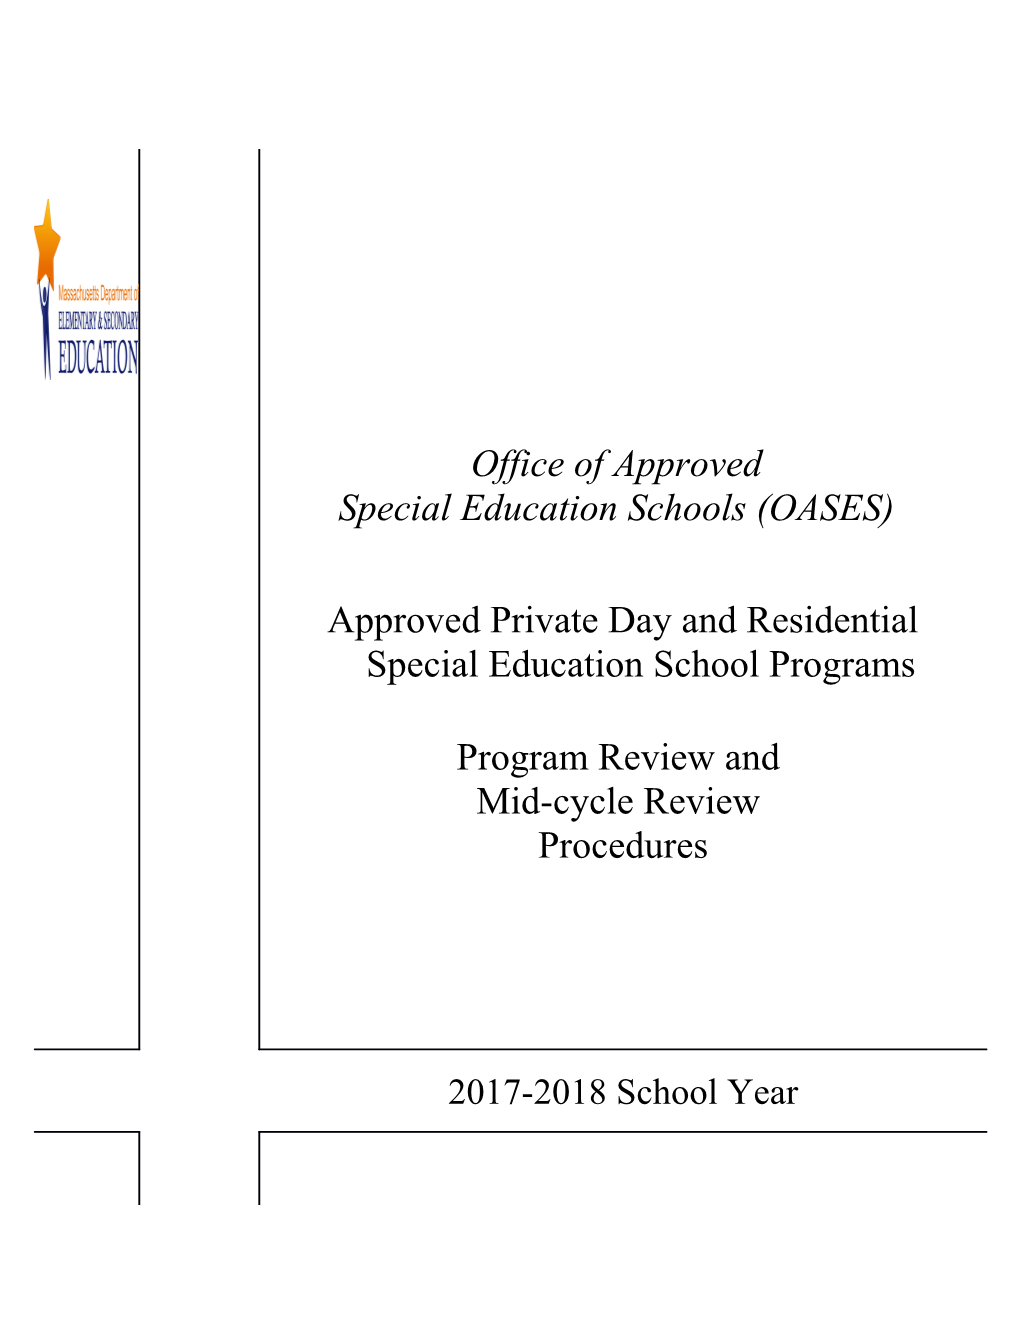 2017-2018 Approved Private Day and Residential Program and Mid-Cycle Review Procedures